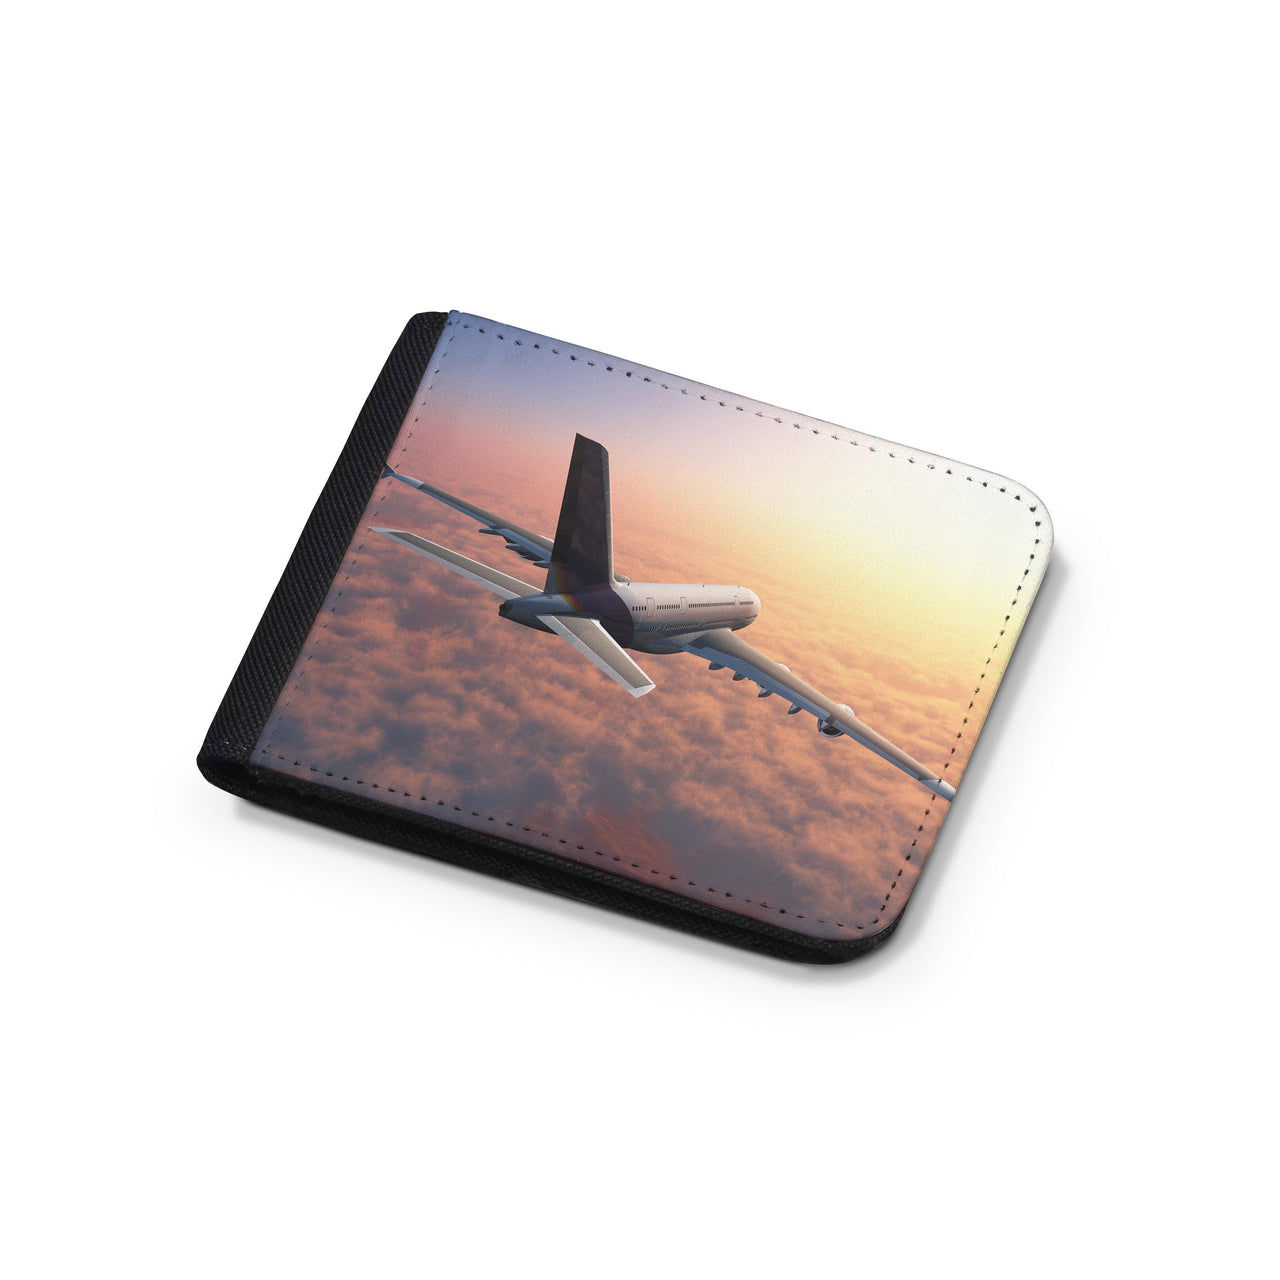 Super Cruising Airbus A380 over Clouds Designed Wallets